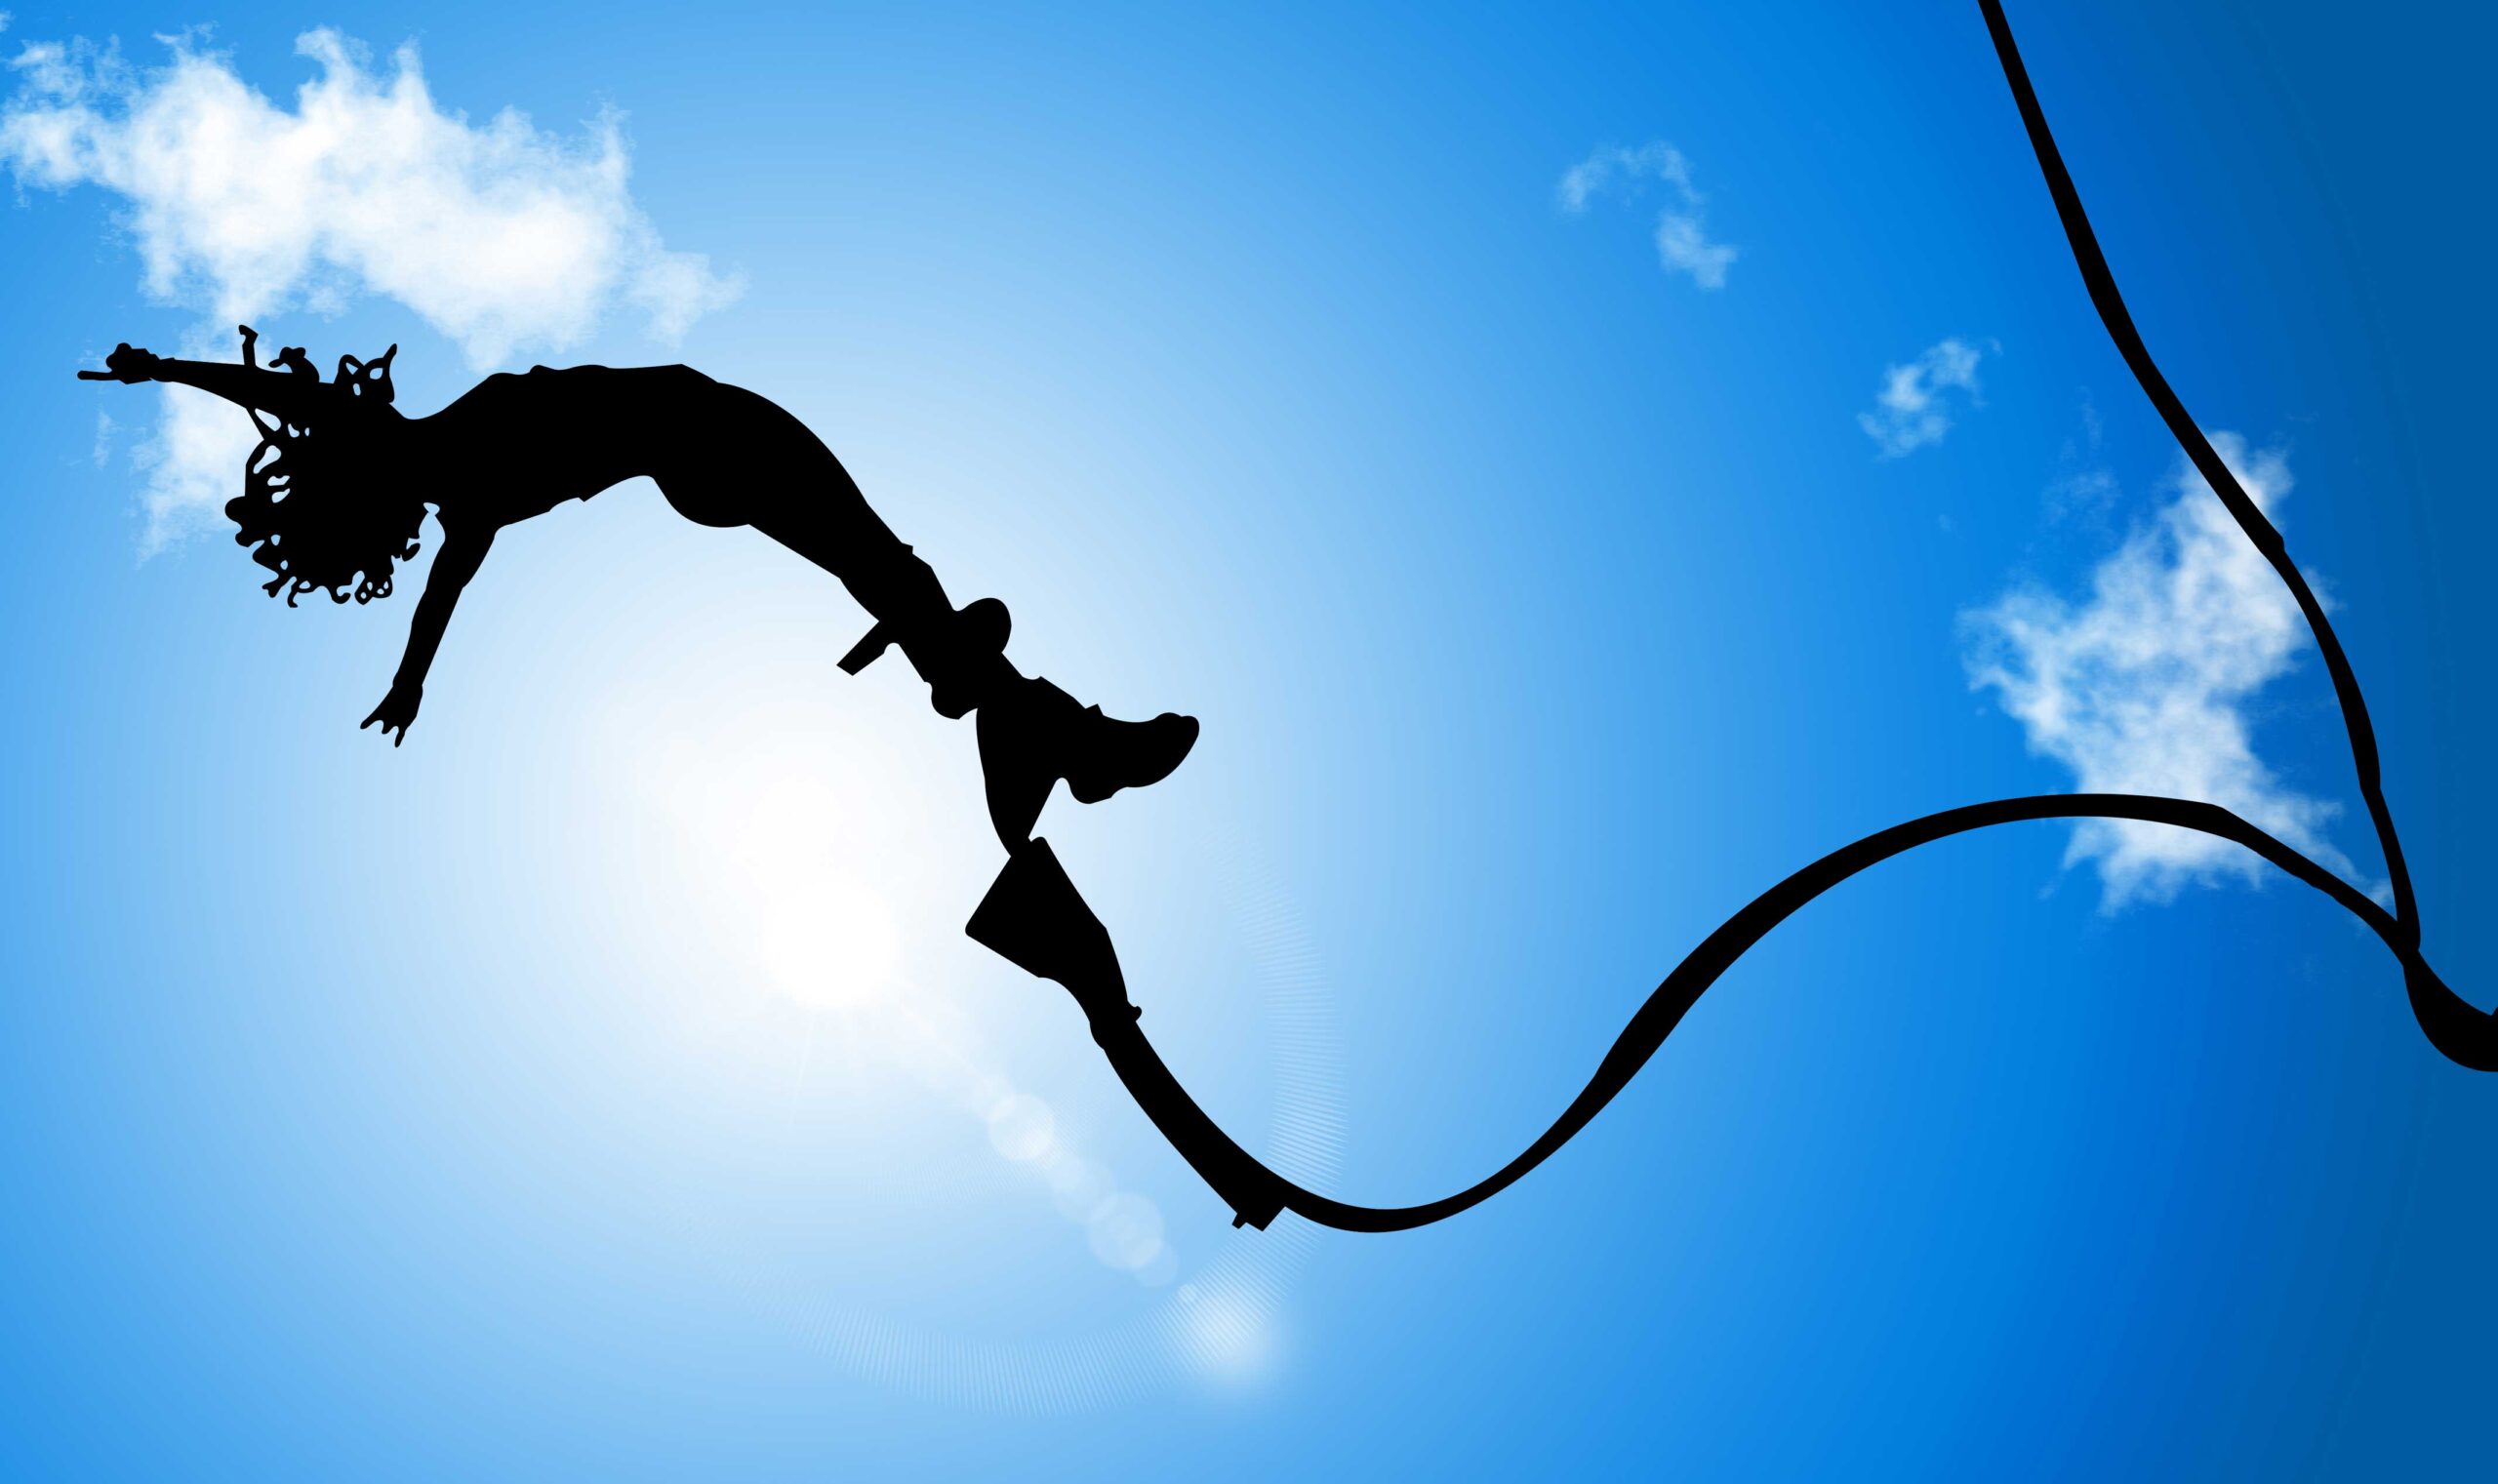 woman jumping from a bungee cord